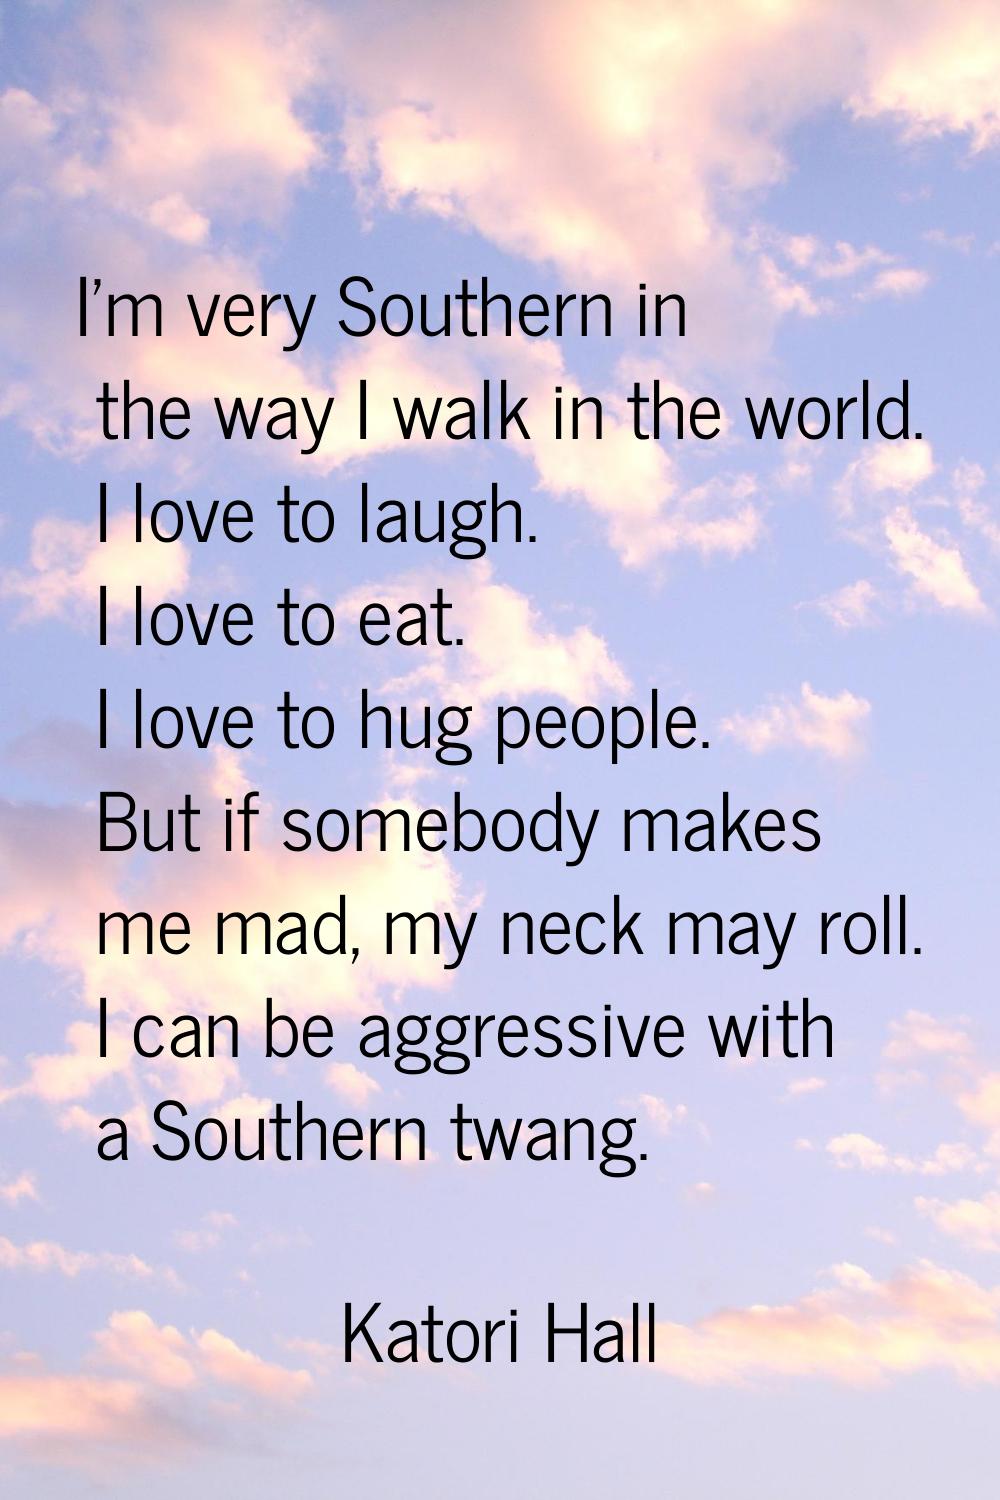 I'm very Southern in the way I walk in the world. I love to laugh. I love to eat. I love to hug peo